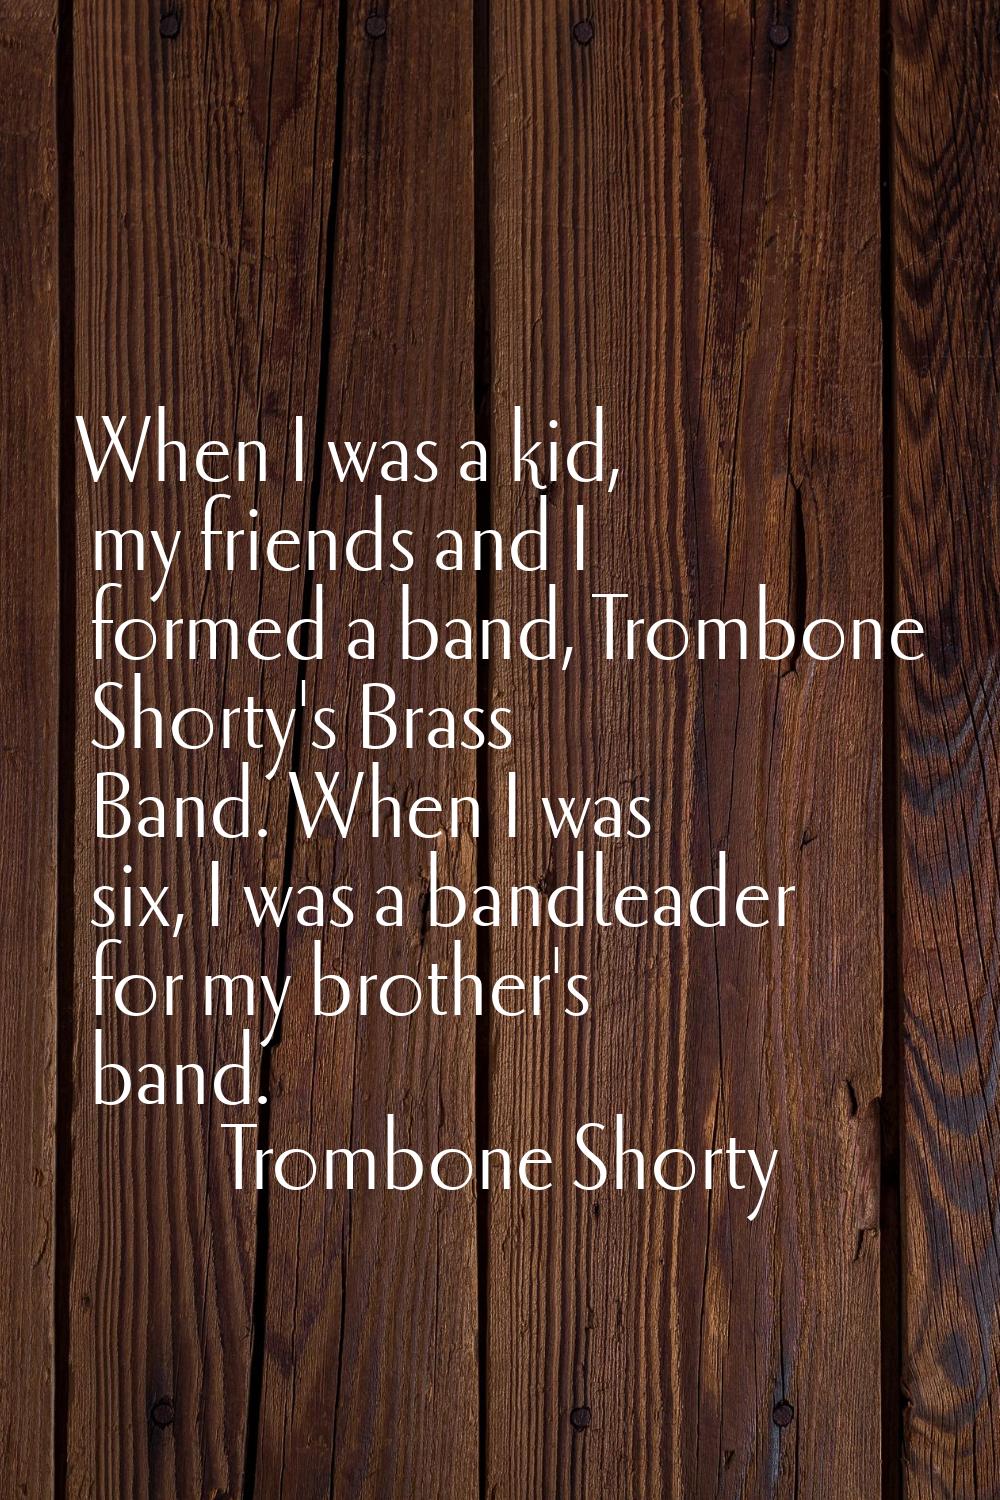 When I was a kid, my friends and I formed a band, Trombone Shorty's Brass Band. When I was six, I w